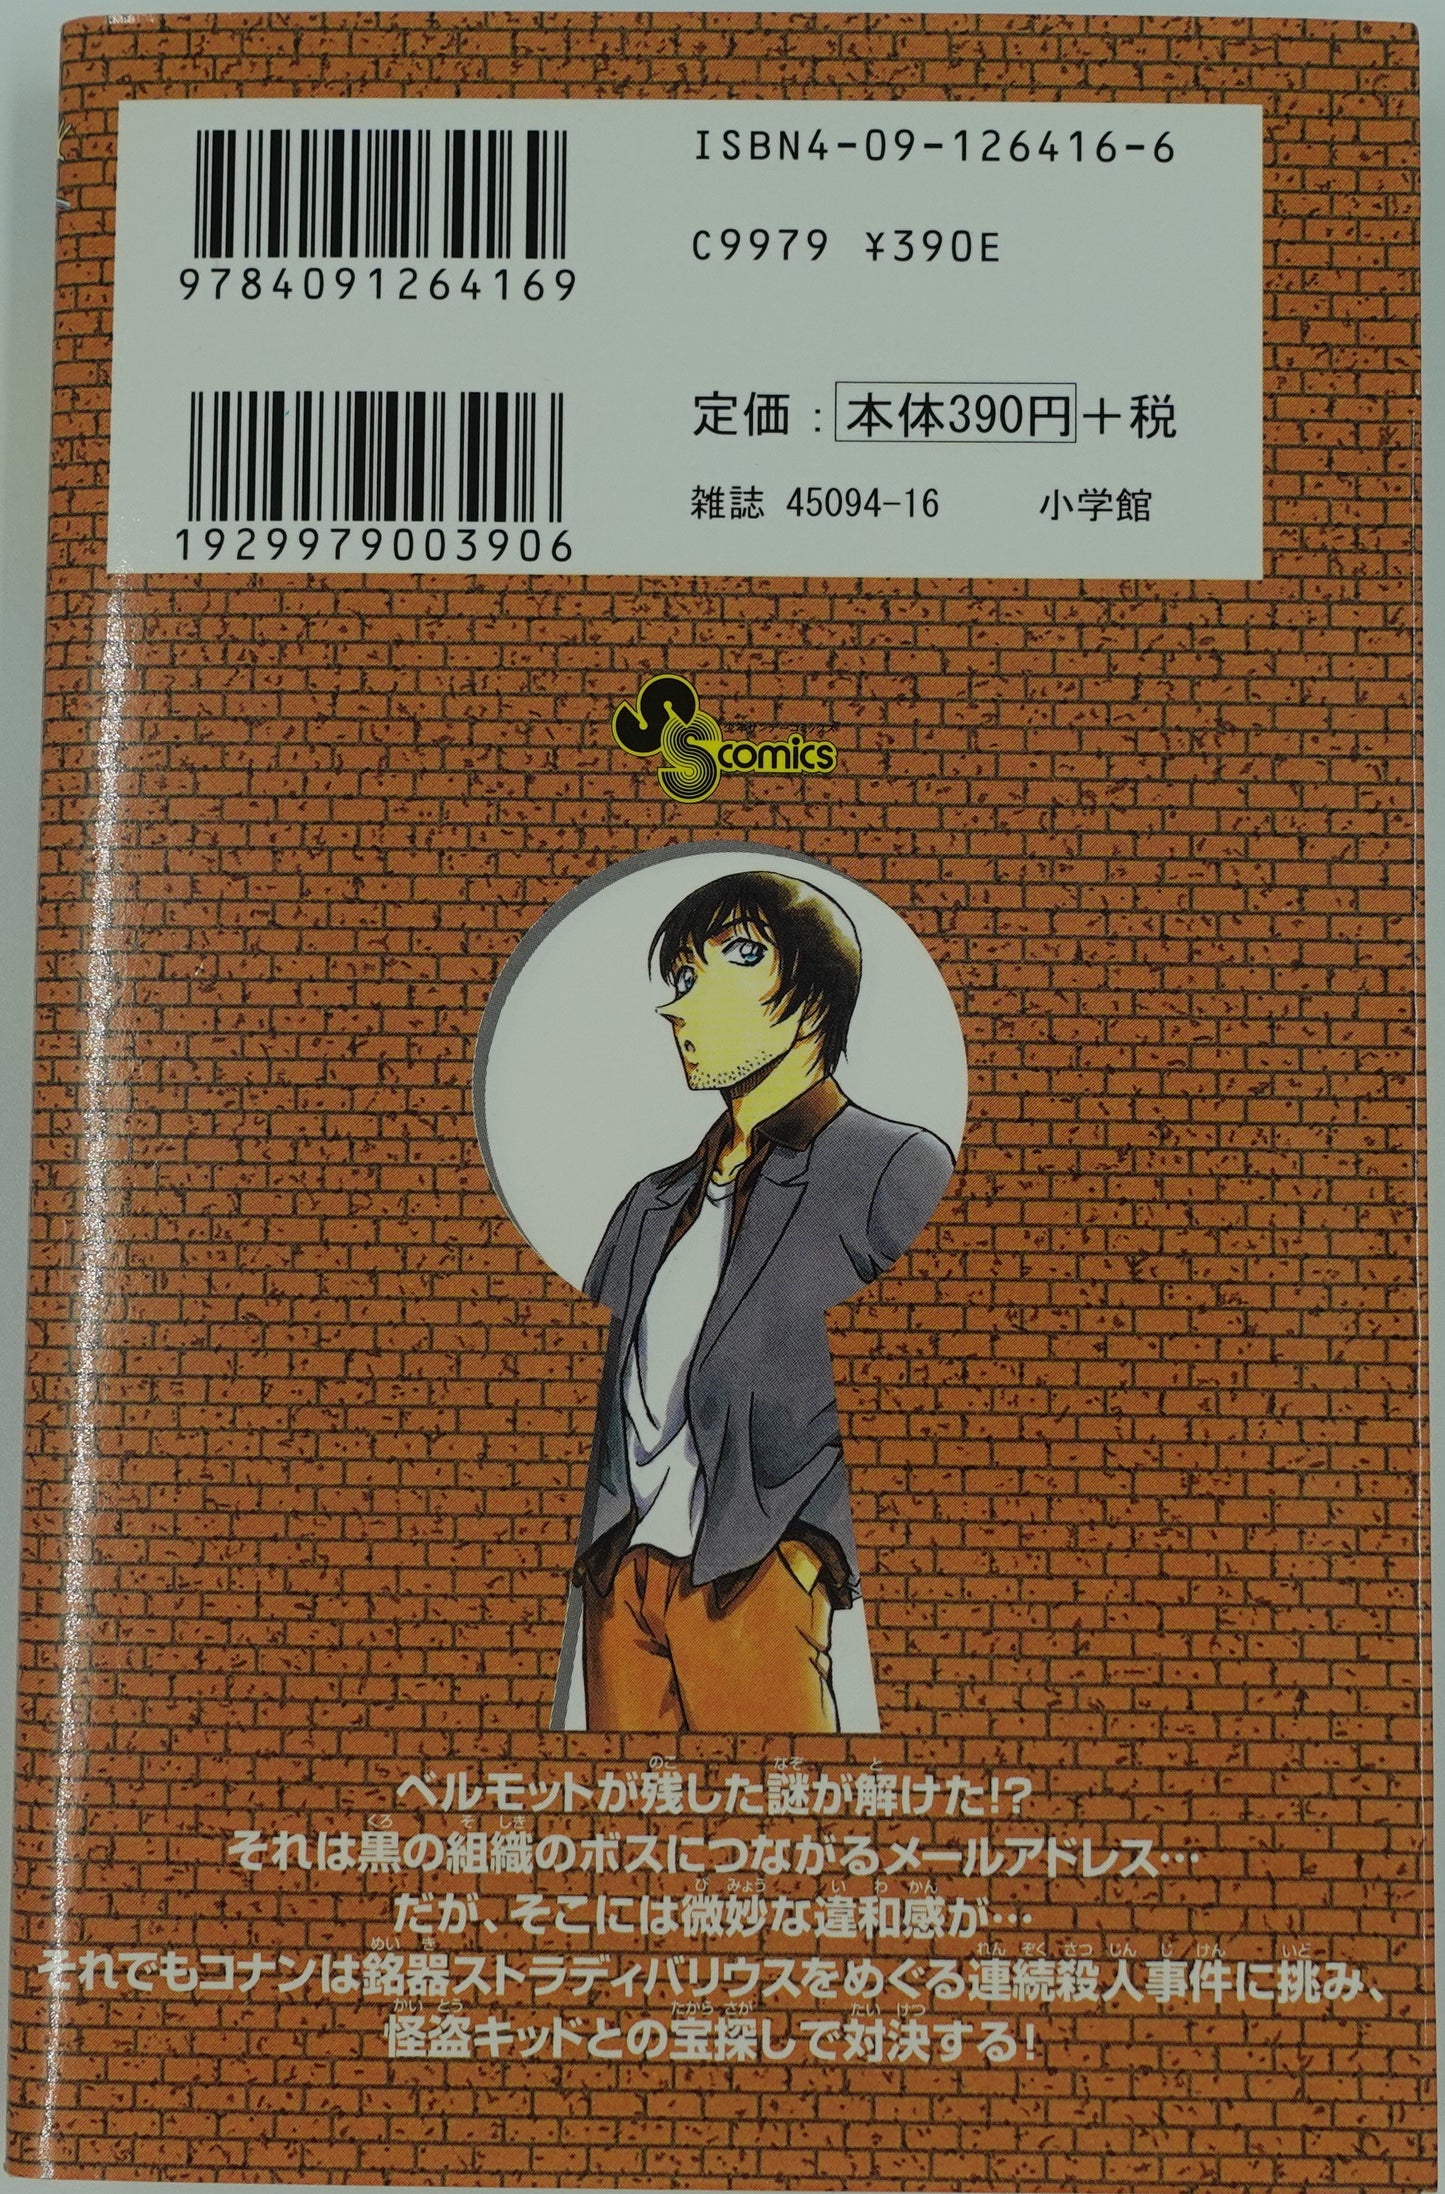 Case Closed Vol.46- Official Japanese Edition